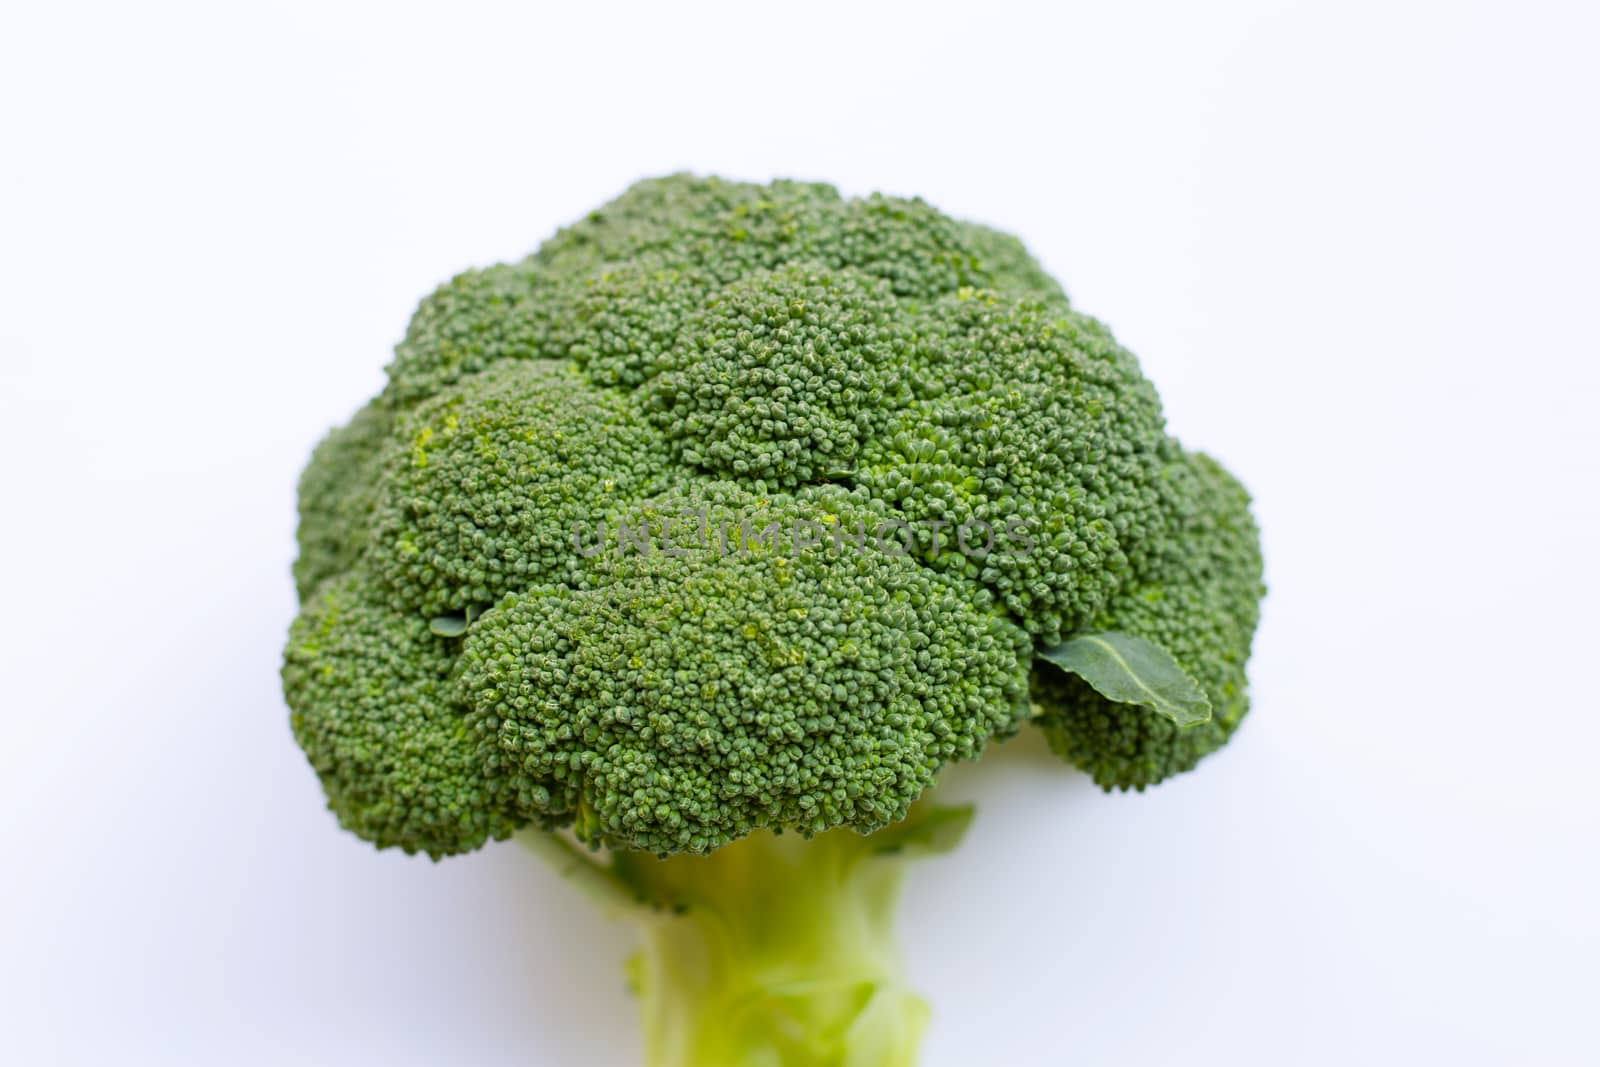 Broccoli on white background
 by Bowonpat